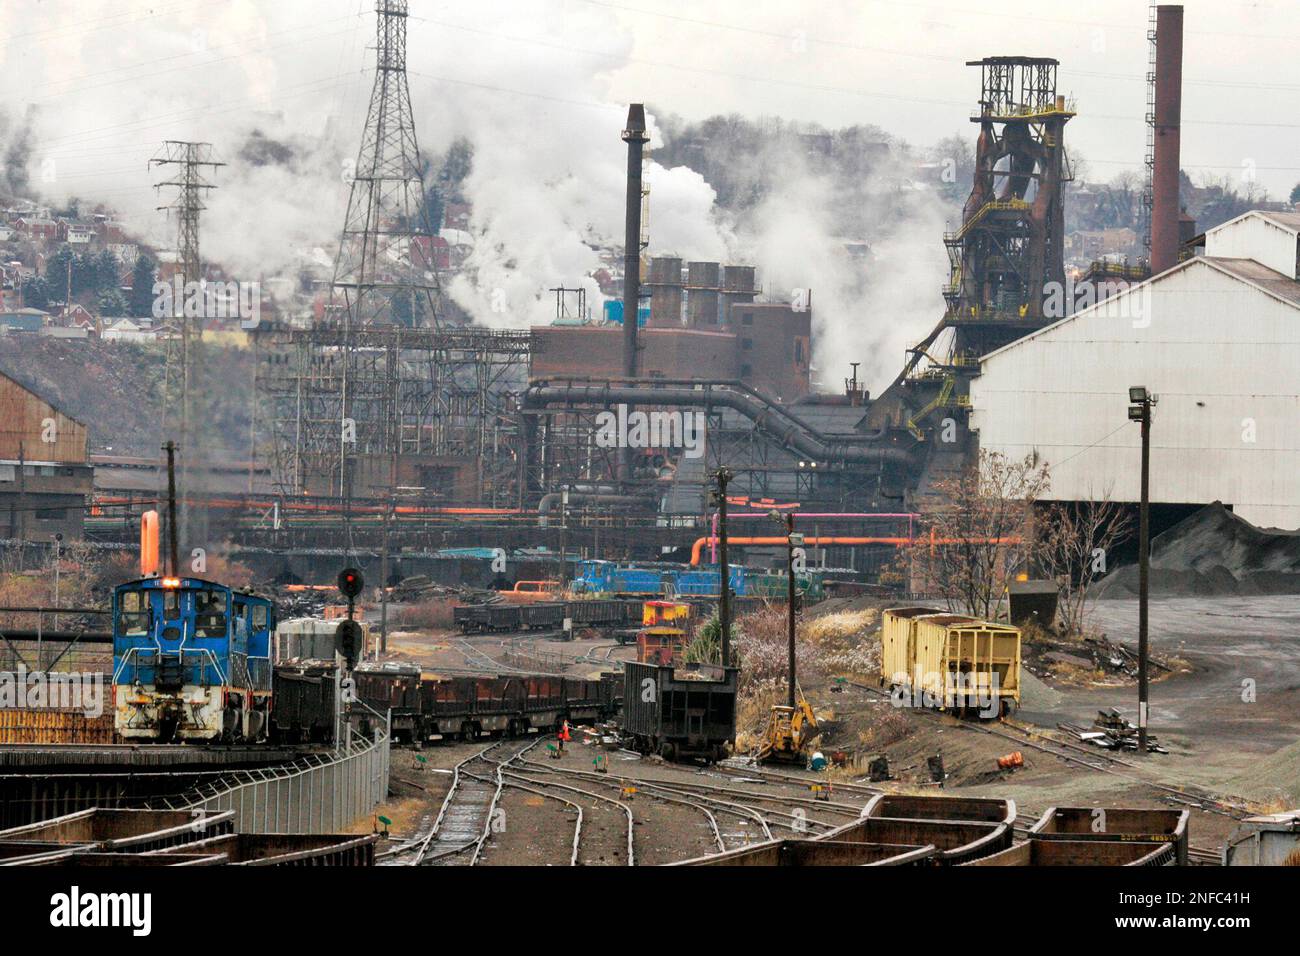 https://c8.alamy.com/comp/2NFC41H/this-is-part-of-united-states-steel-corps-edgar-thomson-works-in-braddock-pa-monday-nov-17-2008-pittsburgh-based-united-states-steel-corp-which-posted-record-profits-for-the-three-months-ended-in-september-said-it-was-laying-off-675-workers-in-the-us-and-canada-due-to-weaker-demand-amid-the-economic-downturn-ap-photogene-j-puskar-2NFC41H.jpg